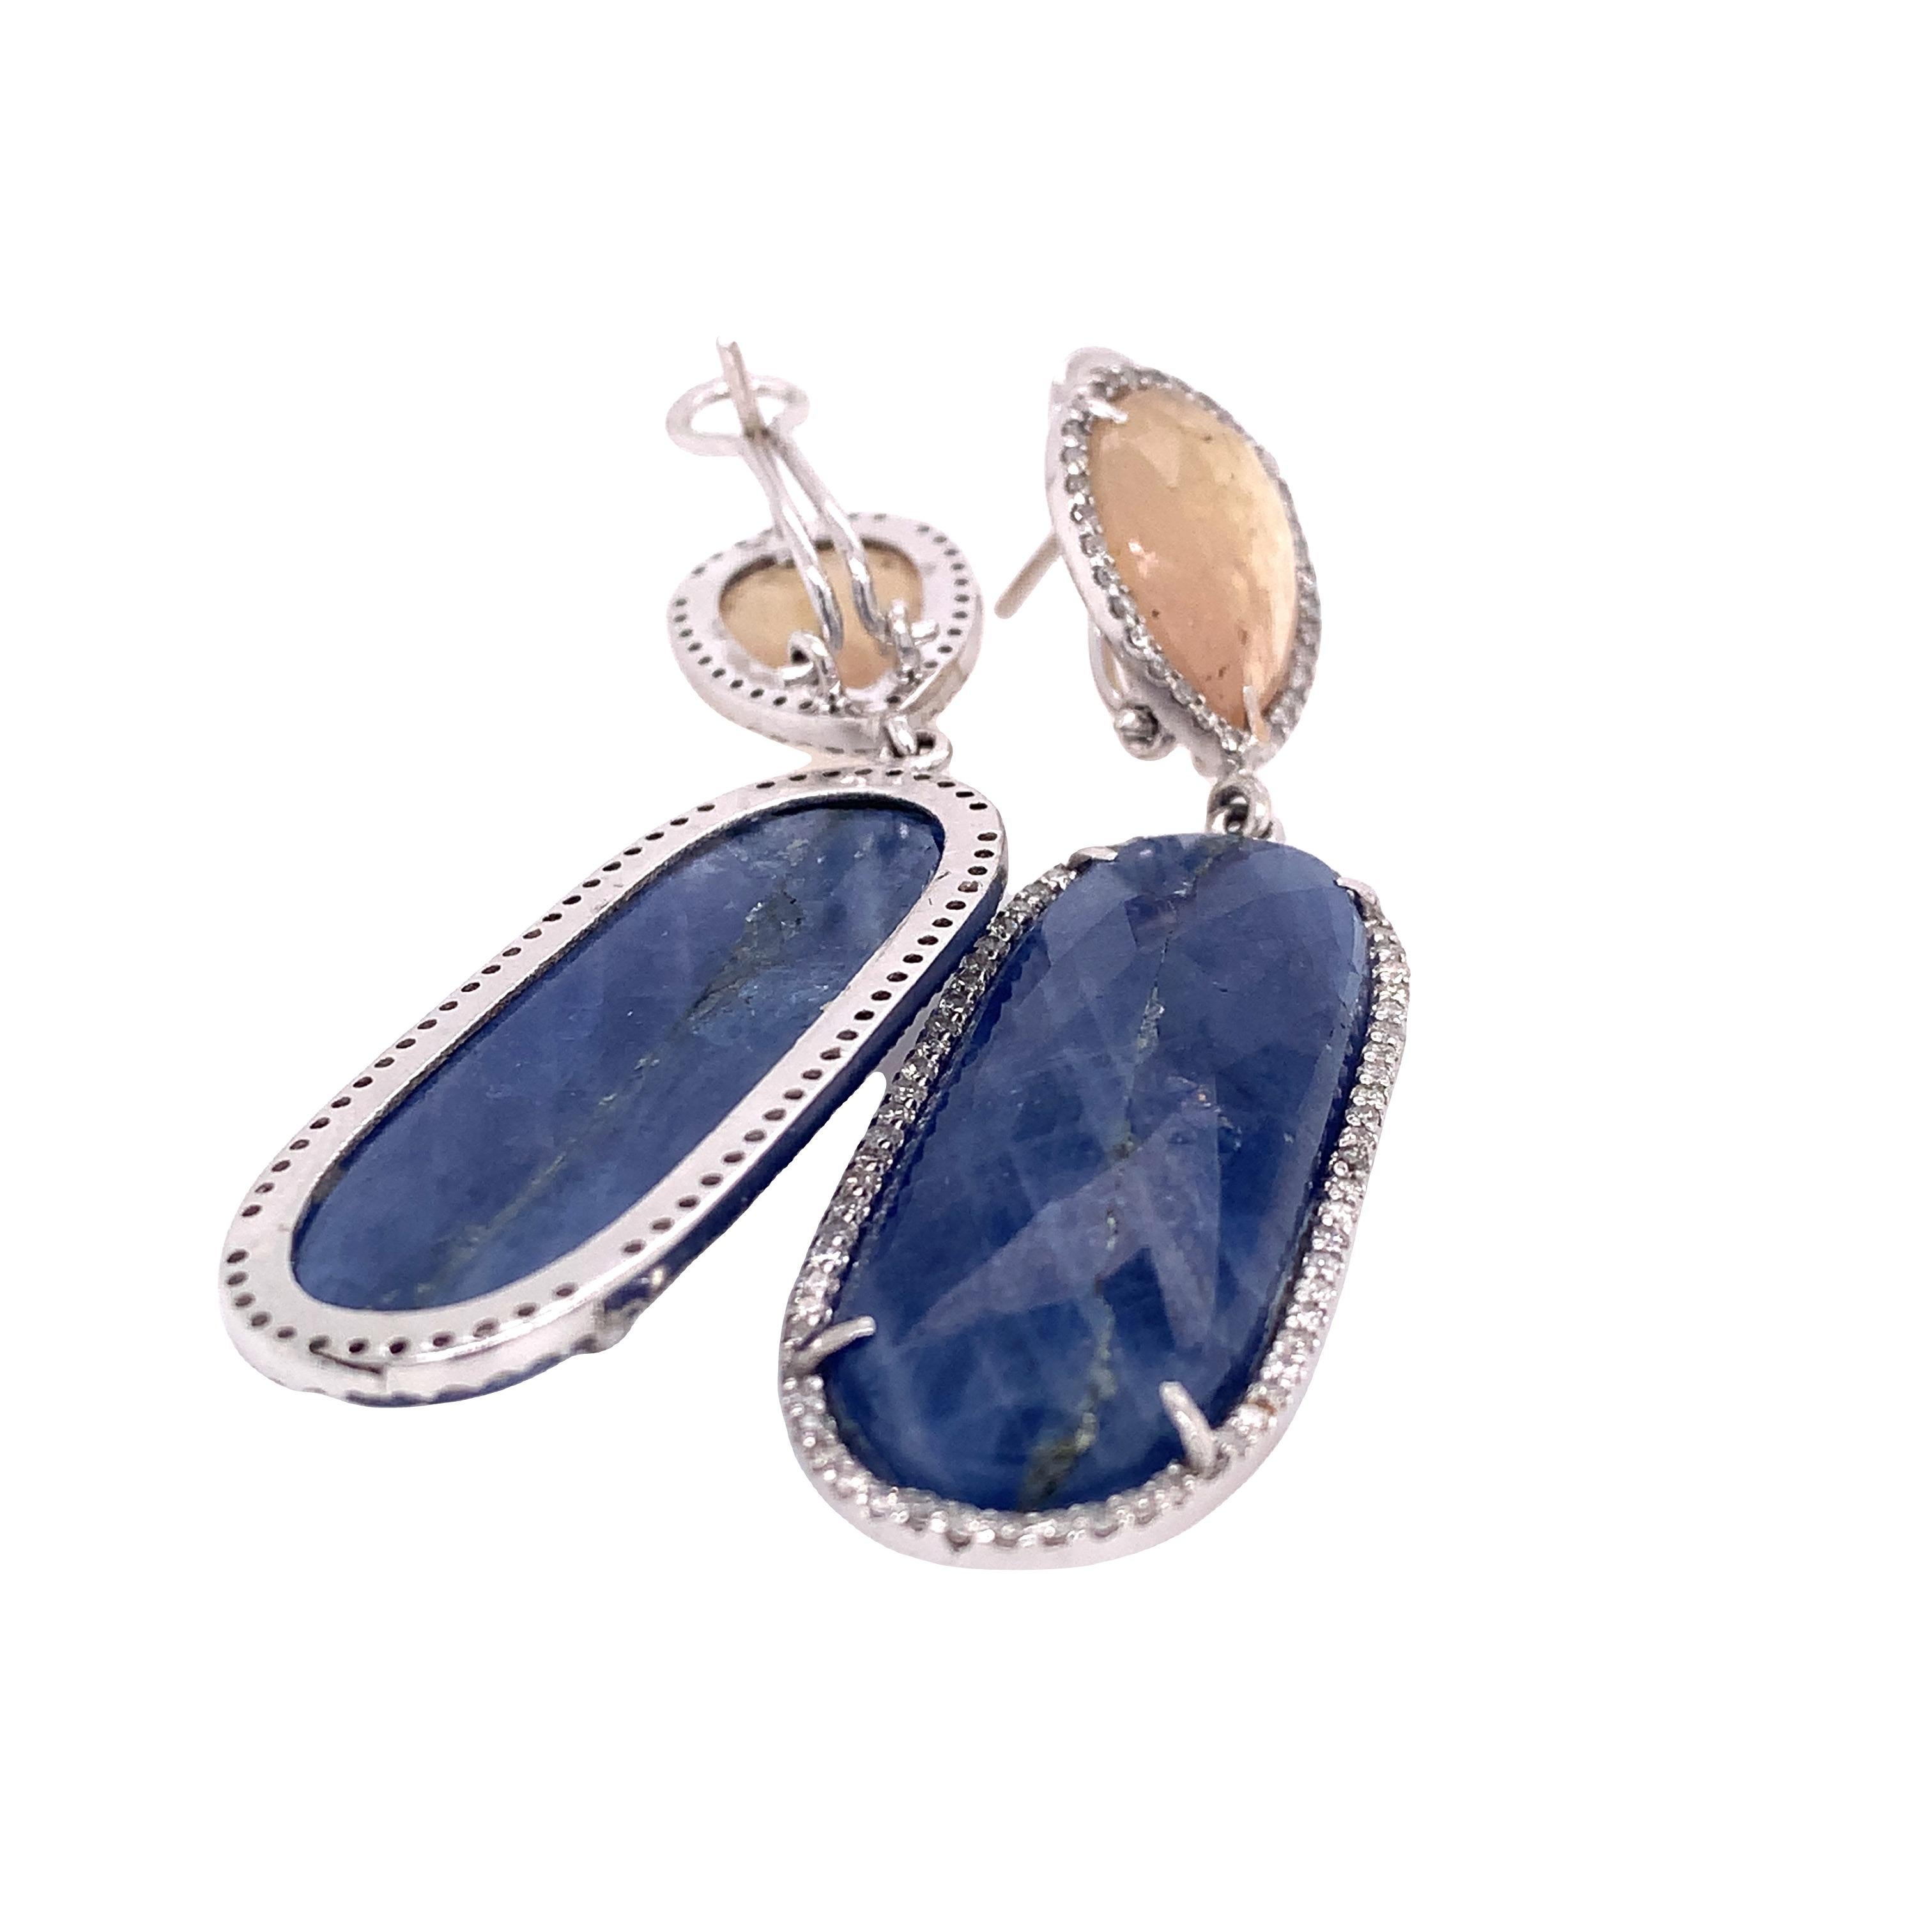 Lillipad Collection

Blue colored elongated Sapphire earrings with diamonds and pure colored Sapphire on top set in 18Kwhite gold.

Sapphire: 60.63ct total weight
Diamond: 1.37ct total weight